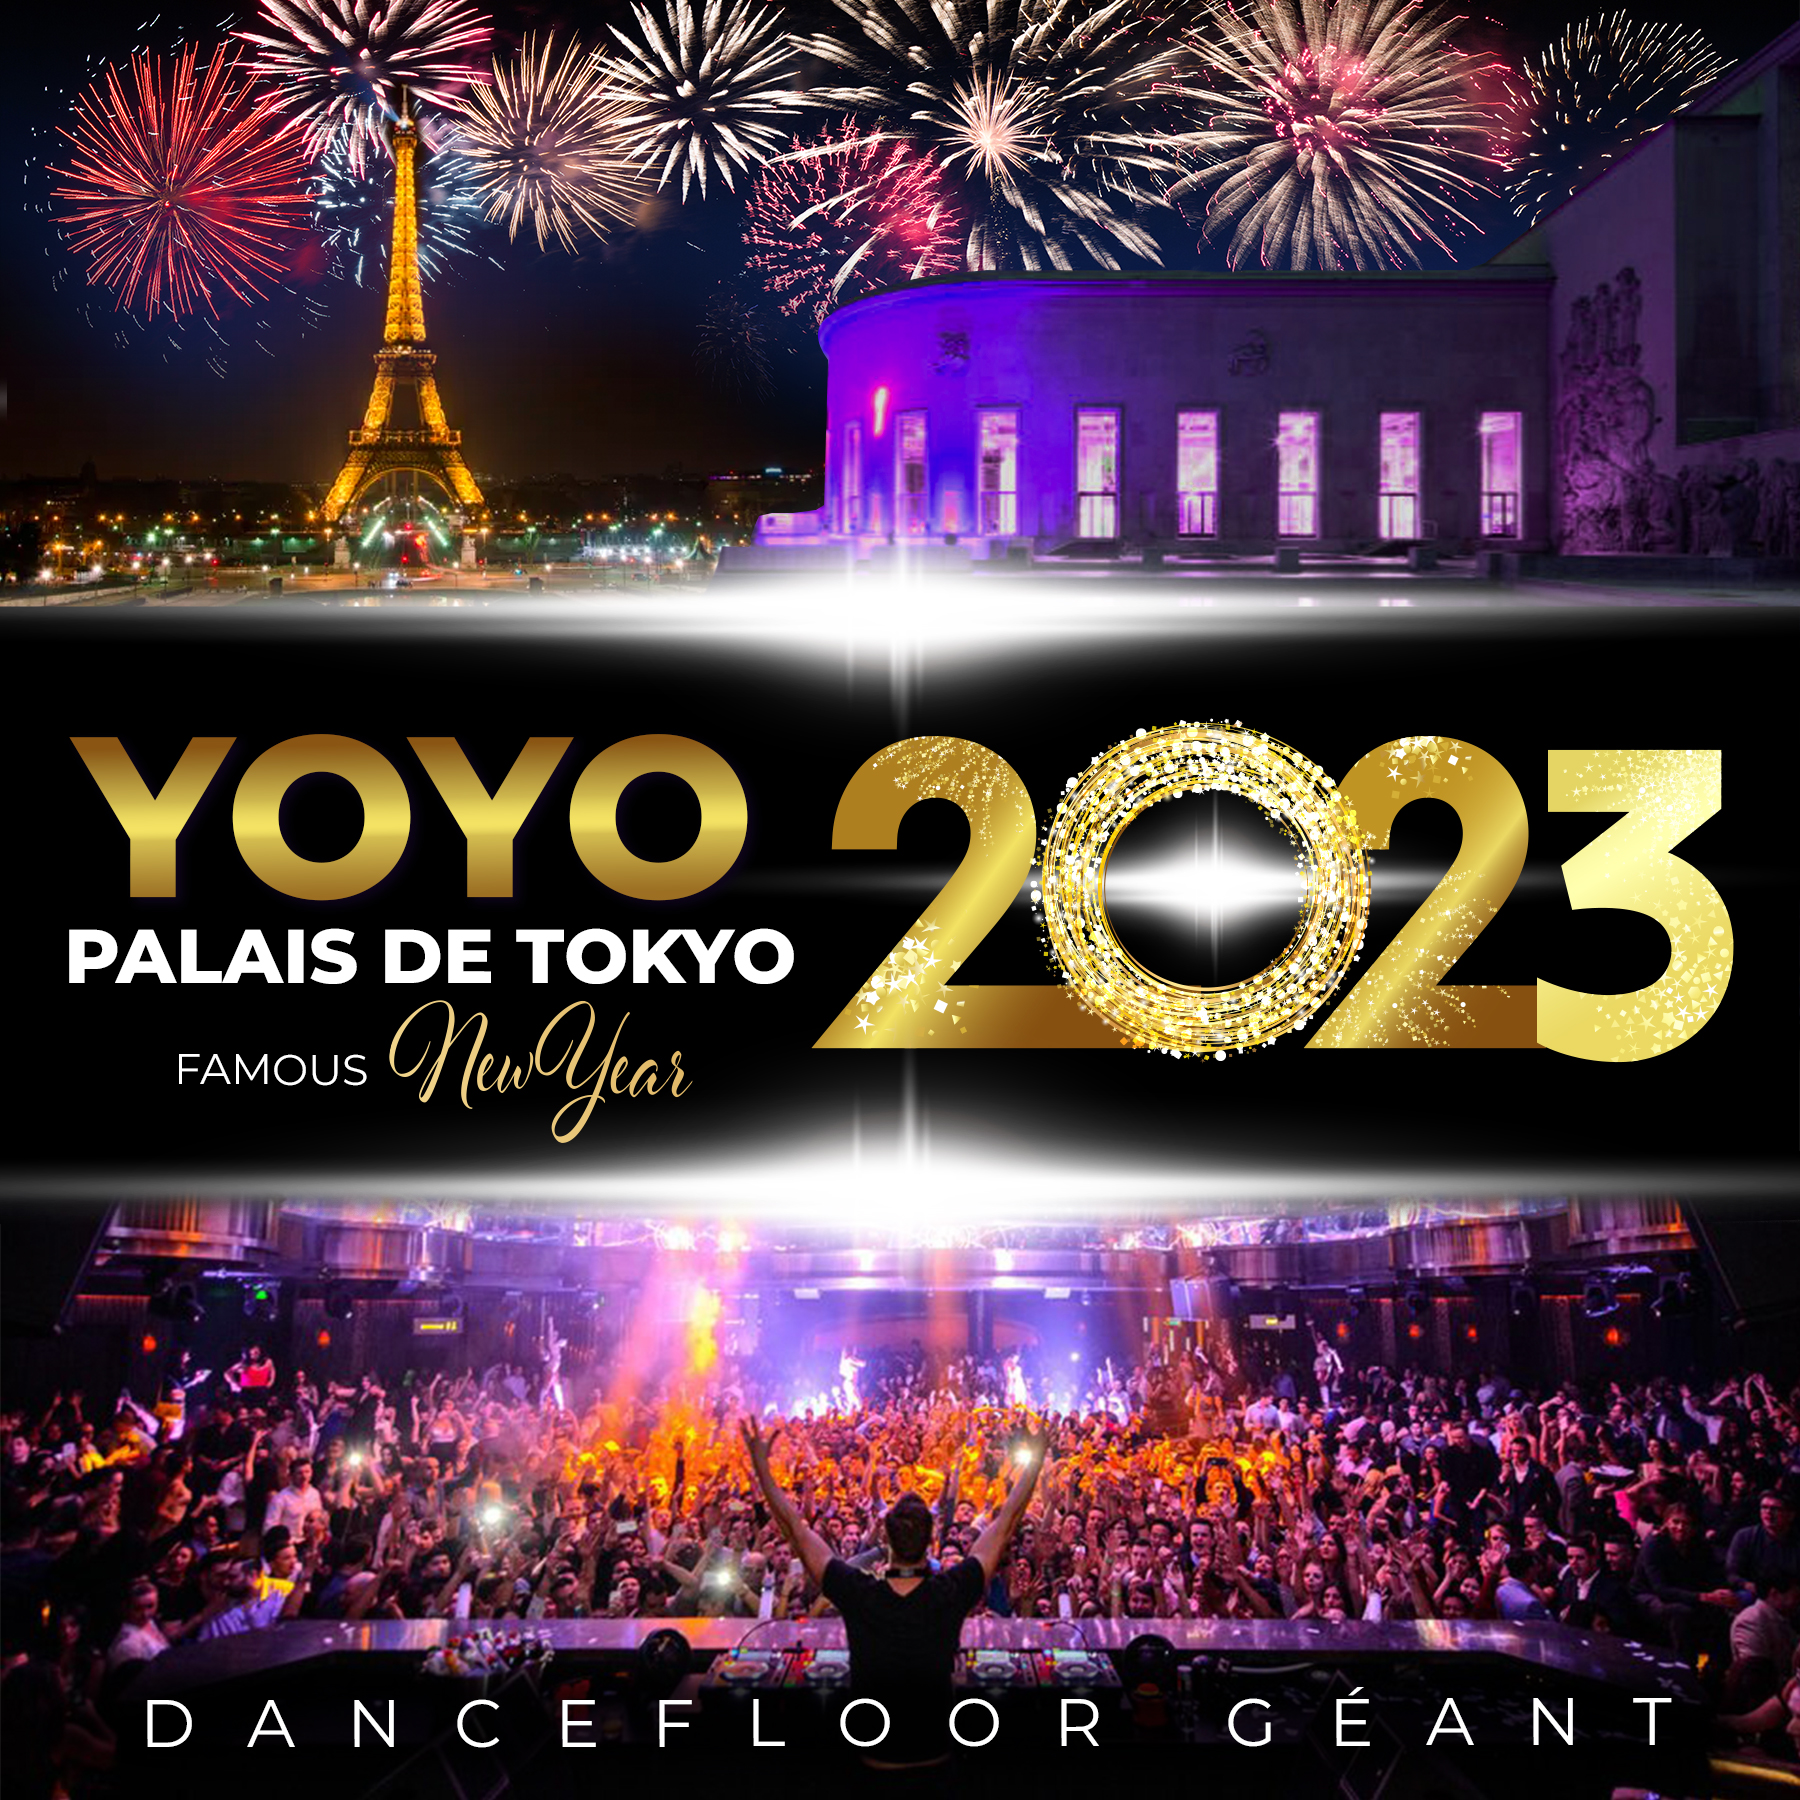 FAMOUS NEW YEAR YOYO - PALAIS DE TOKYO BIG PARTY 2023 | Placeminute